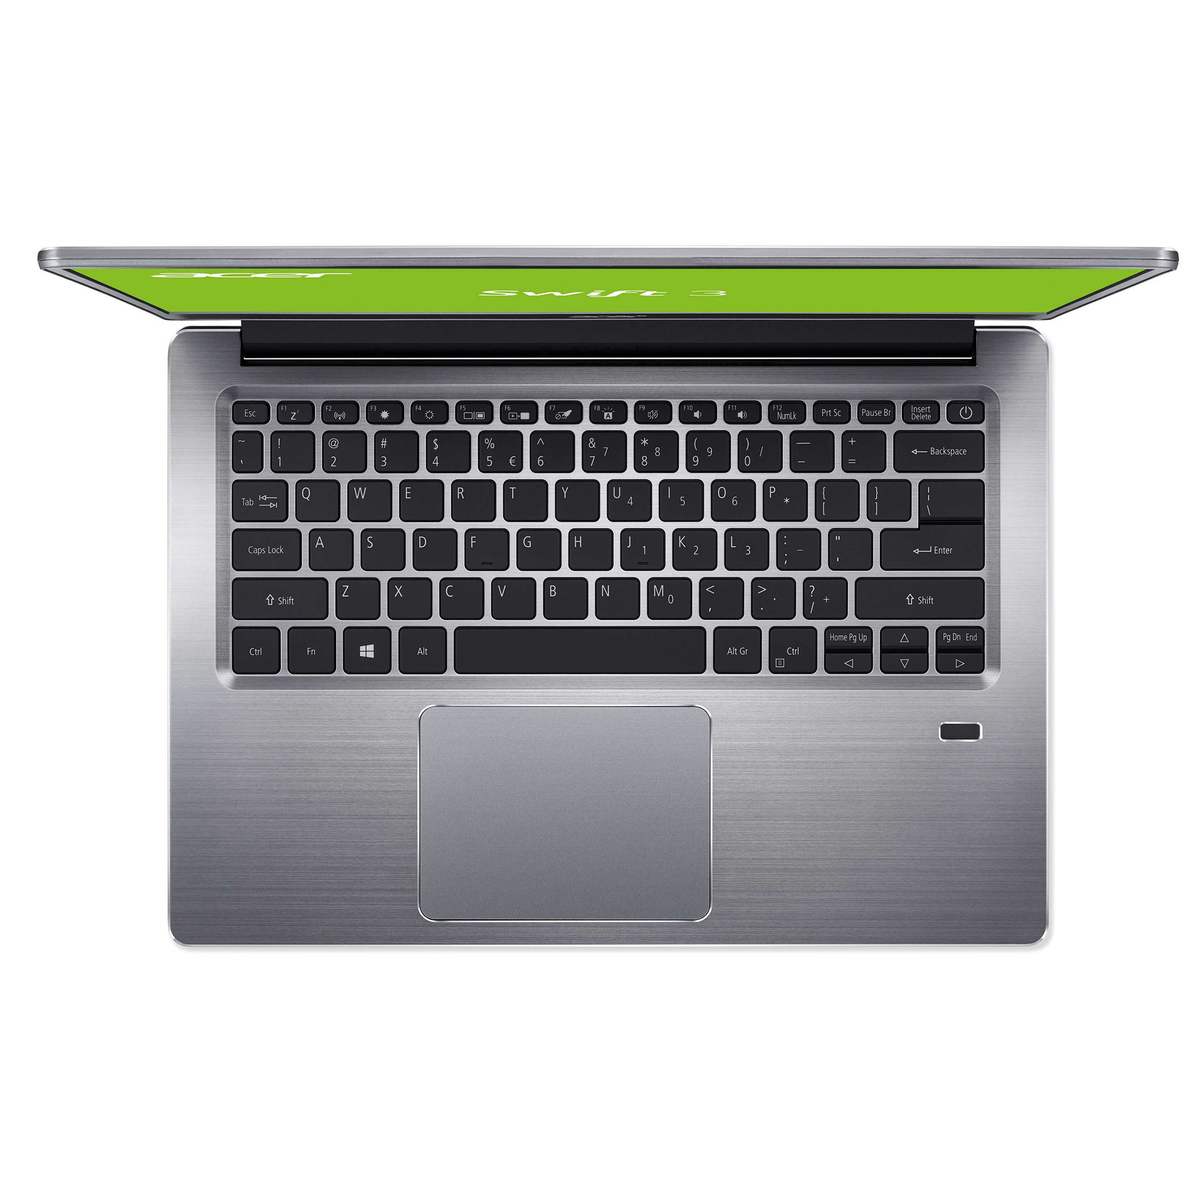 Acer Notebook SF314-56G-54P0 Core i5 Silver